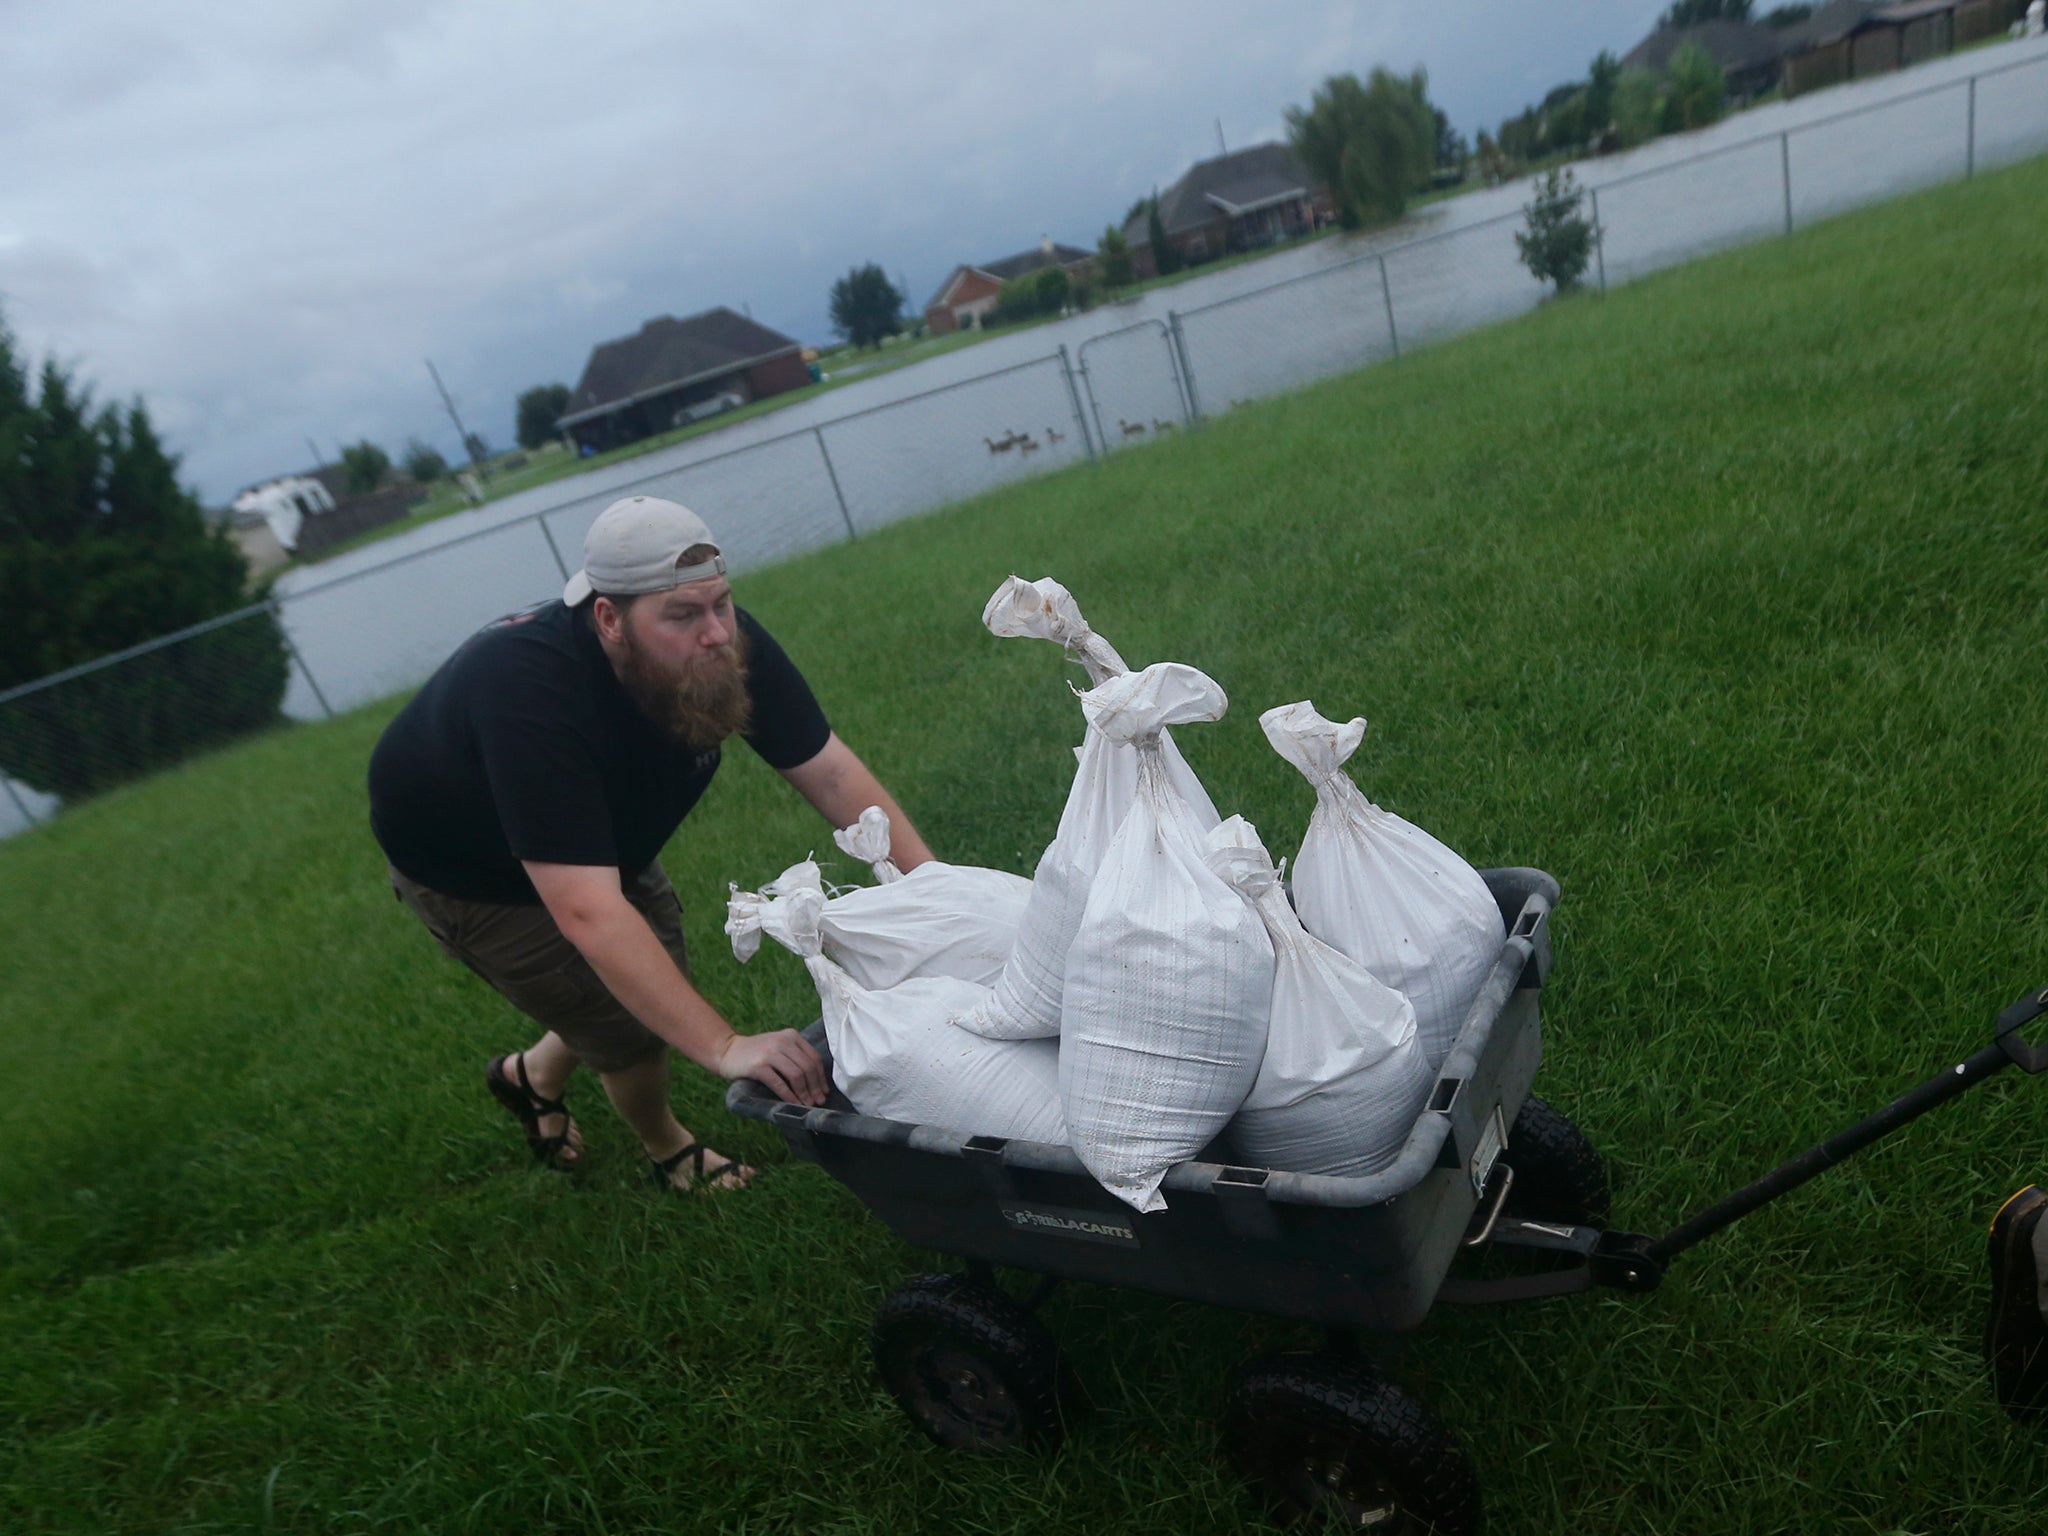 Cody McLemore pushes a wagon filled with sandbags as he fortifies his house in the flooded Clearfield Farm subdivision, in anticipation of more flooding from Tropical Storm Harvey, in Lake Charles, Louisiana